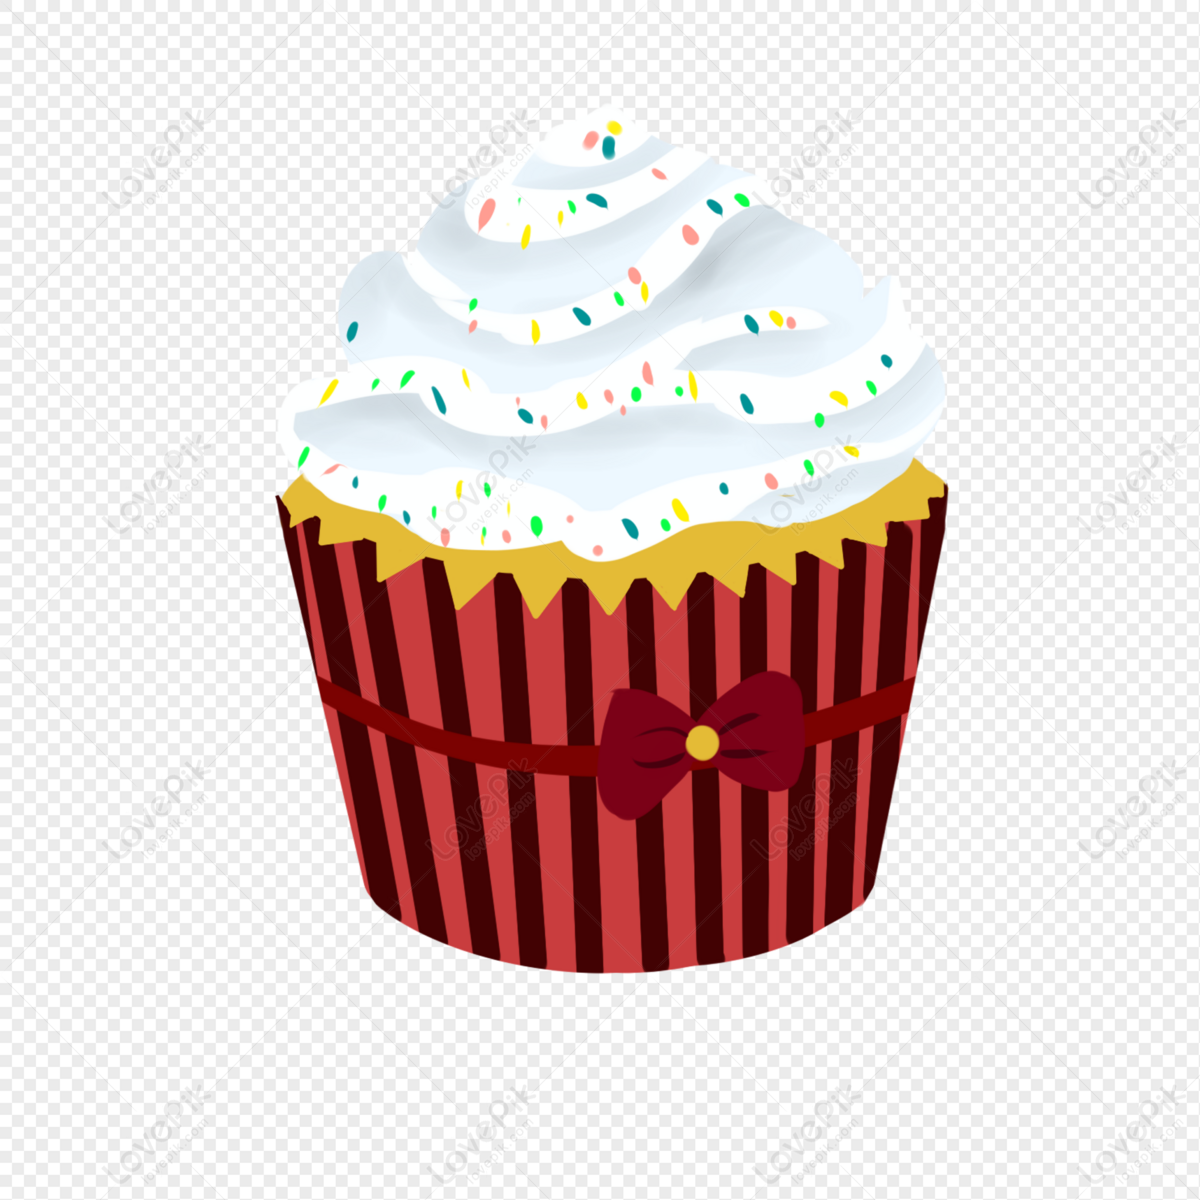 Cupcake Red Dessert Cake PNG Transparent Background And Clipart Image For  Free Download - Lovepik | 401269120